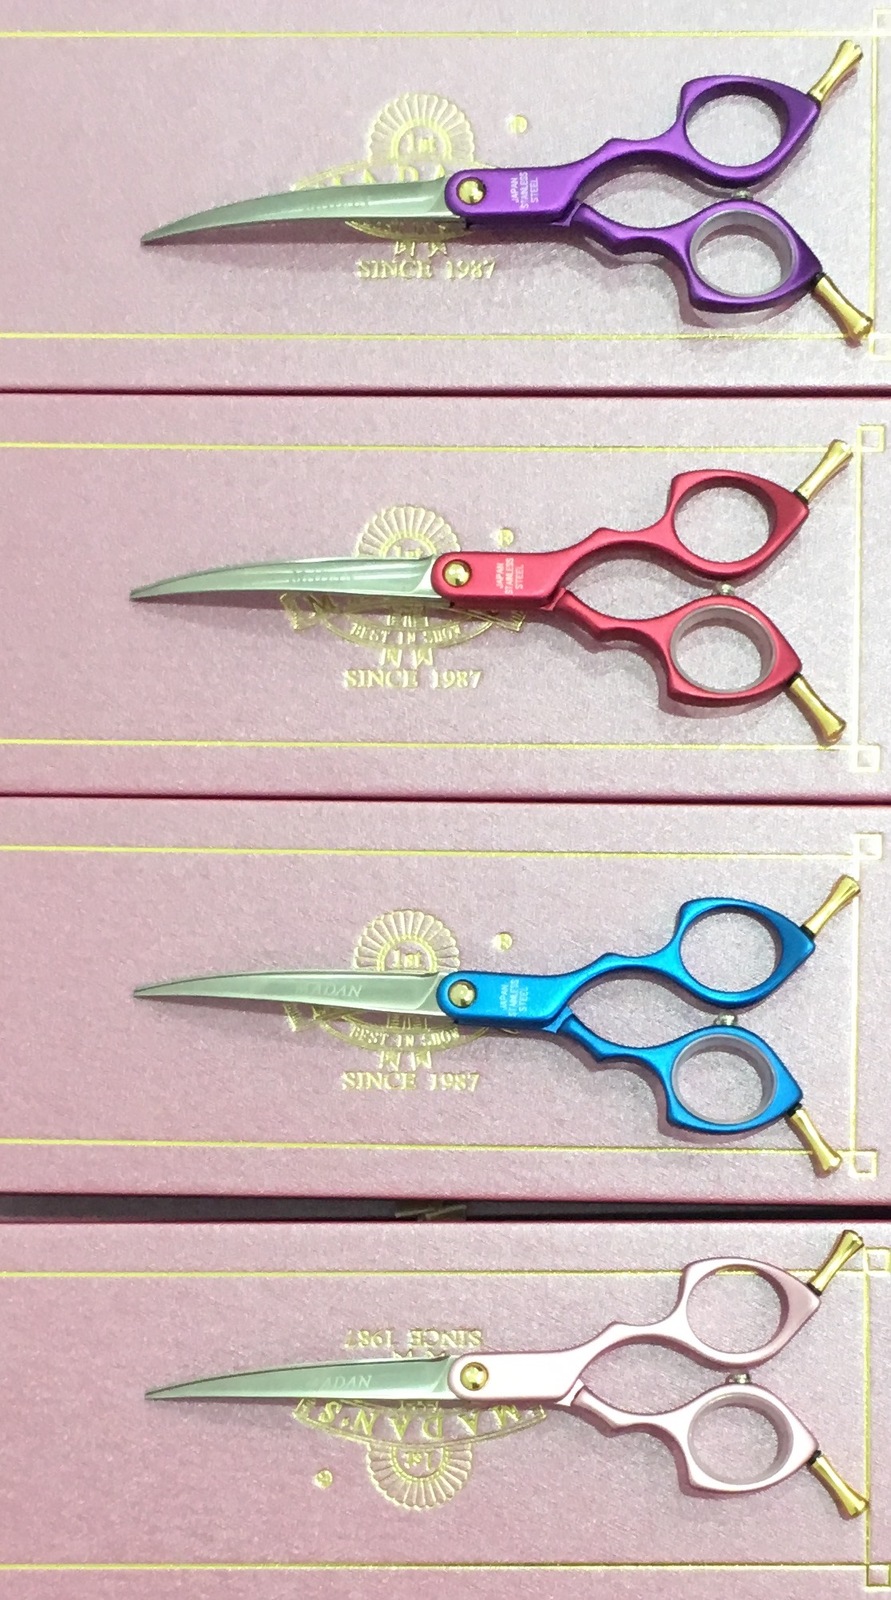 extreme curved grooming shears